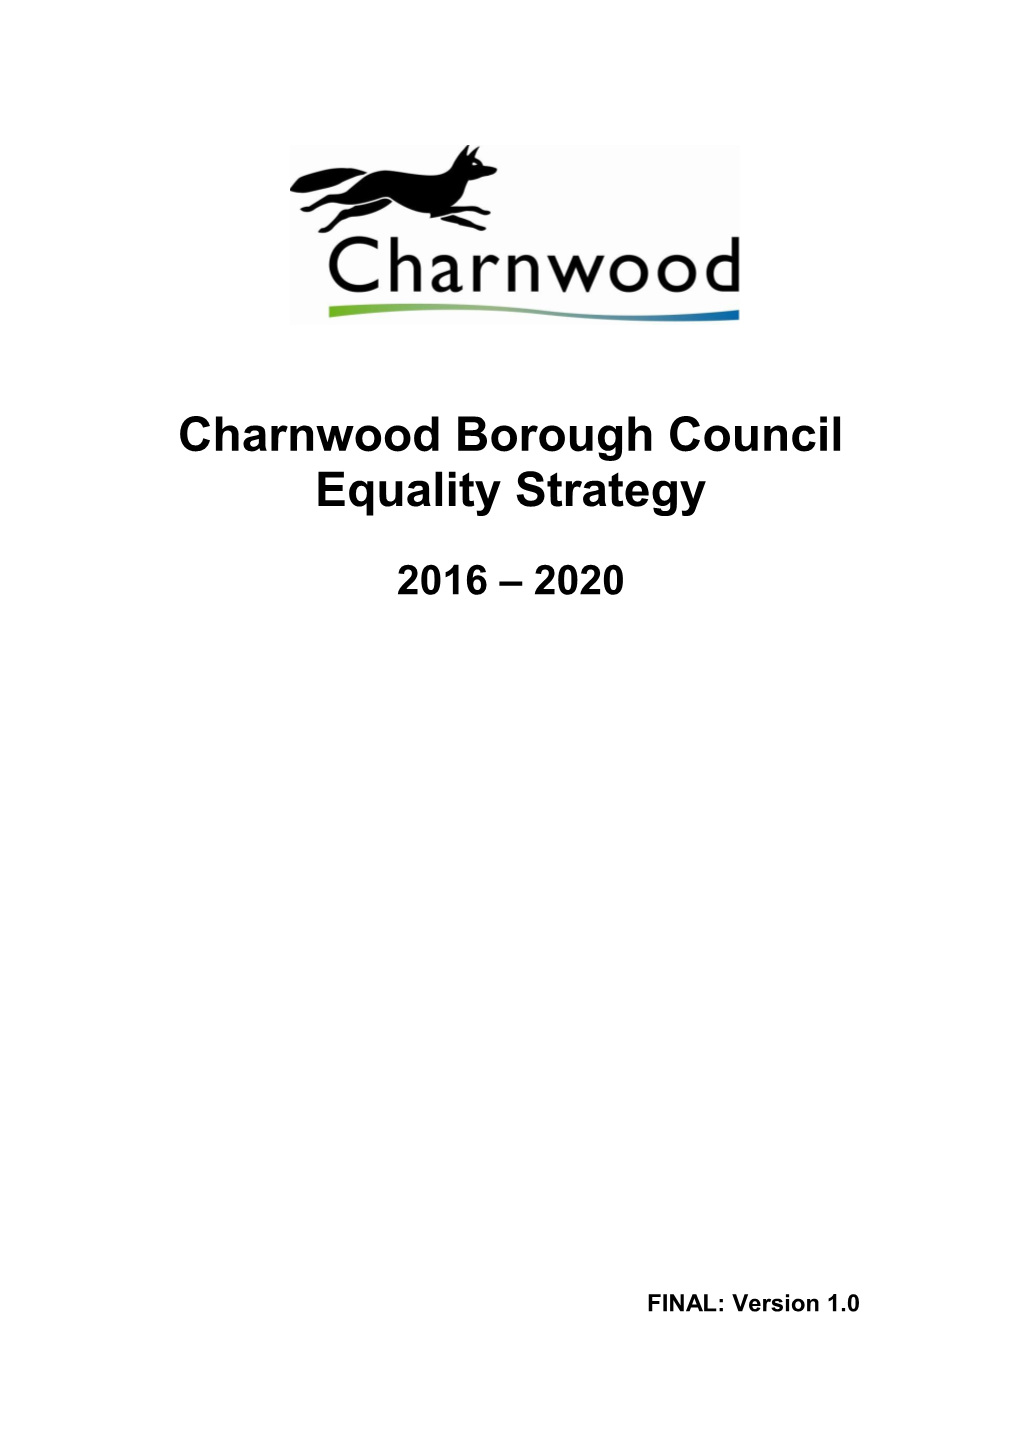 Charnwood Borough Council Equality Strategy